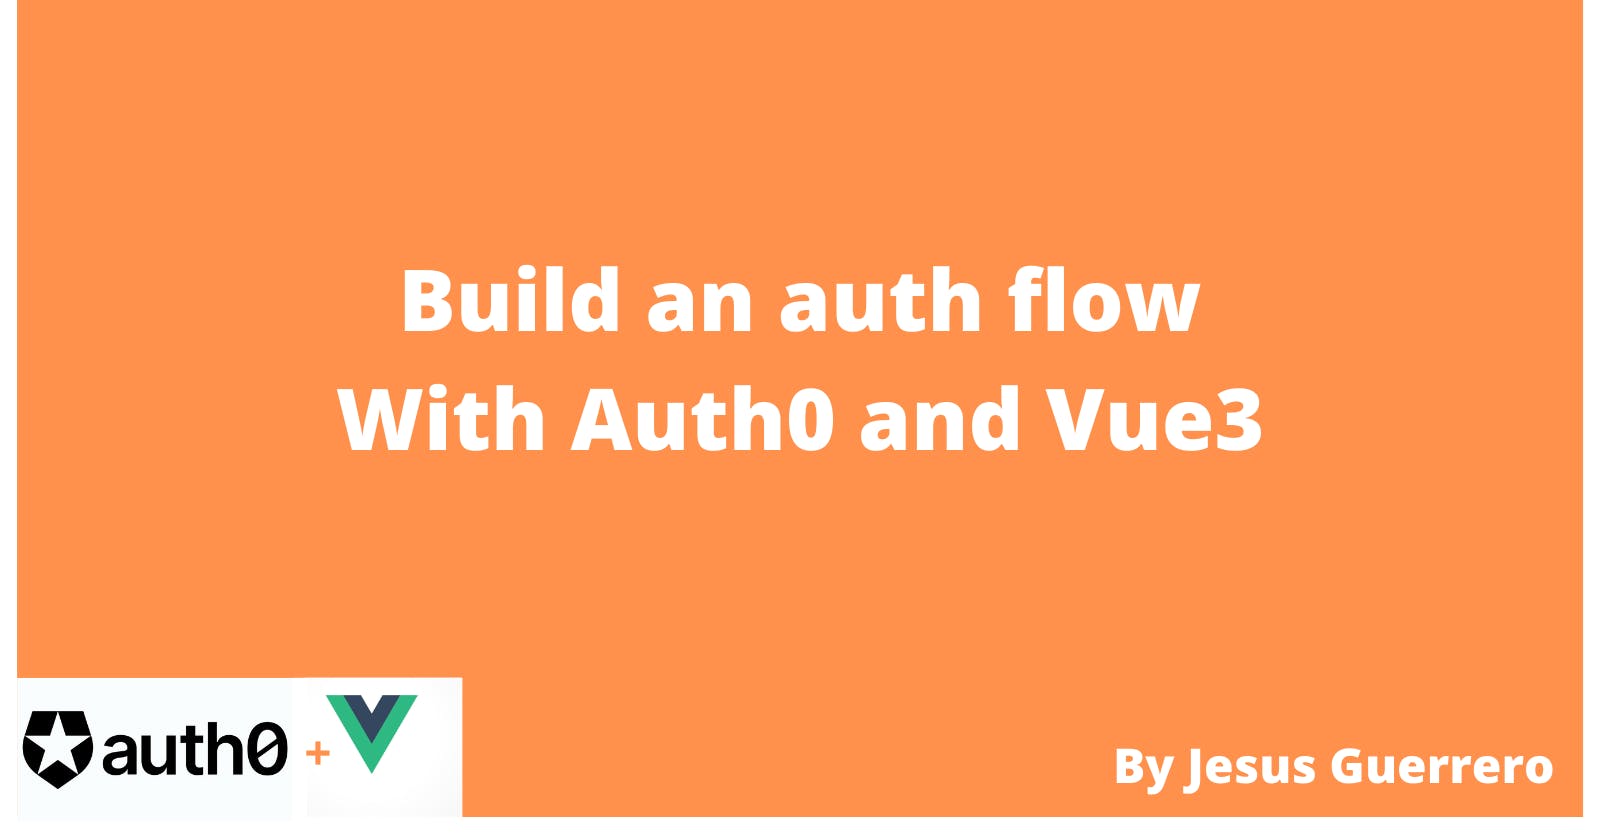 Build an authentication flow with Auth0 and Vue3